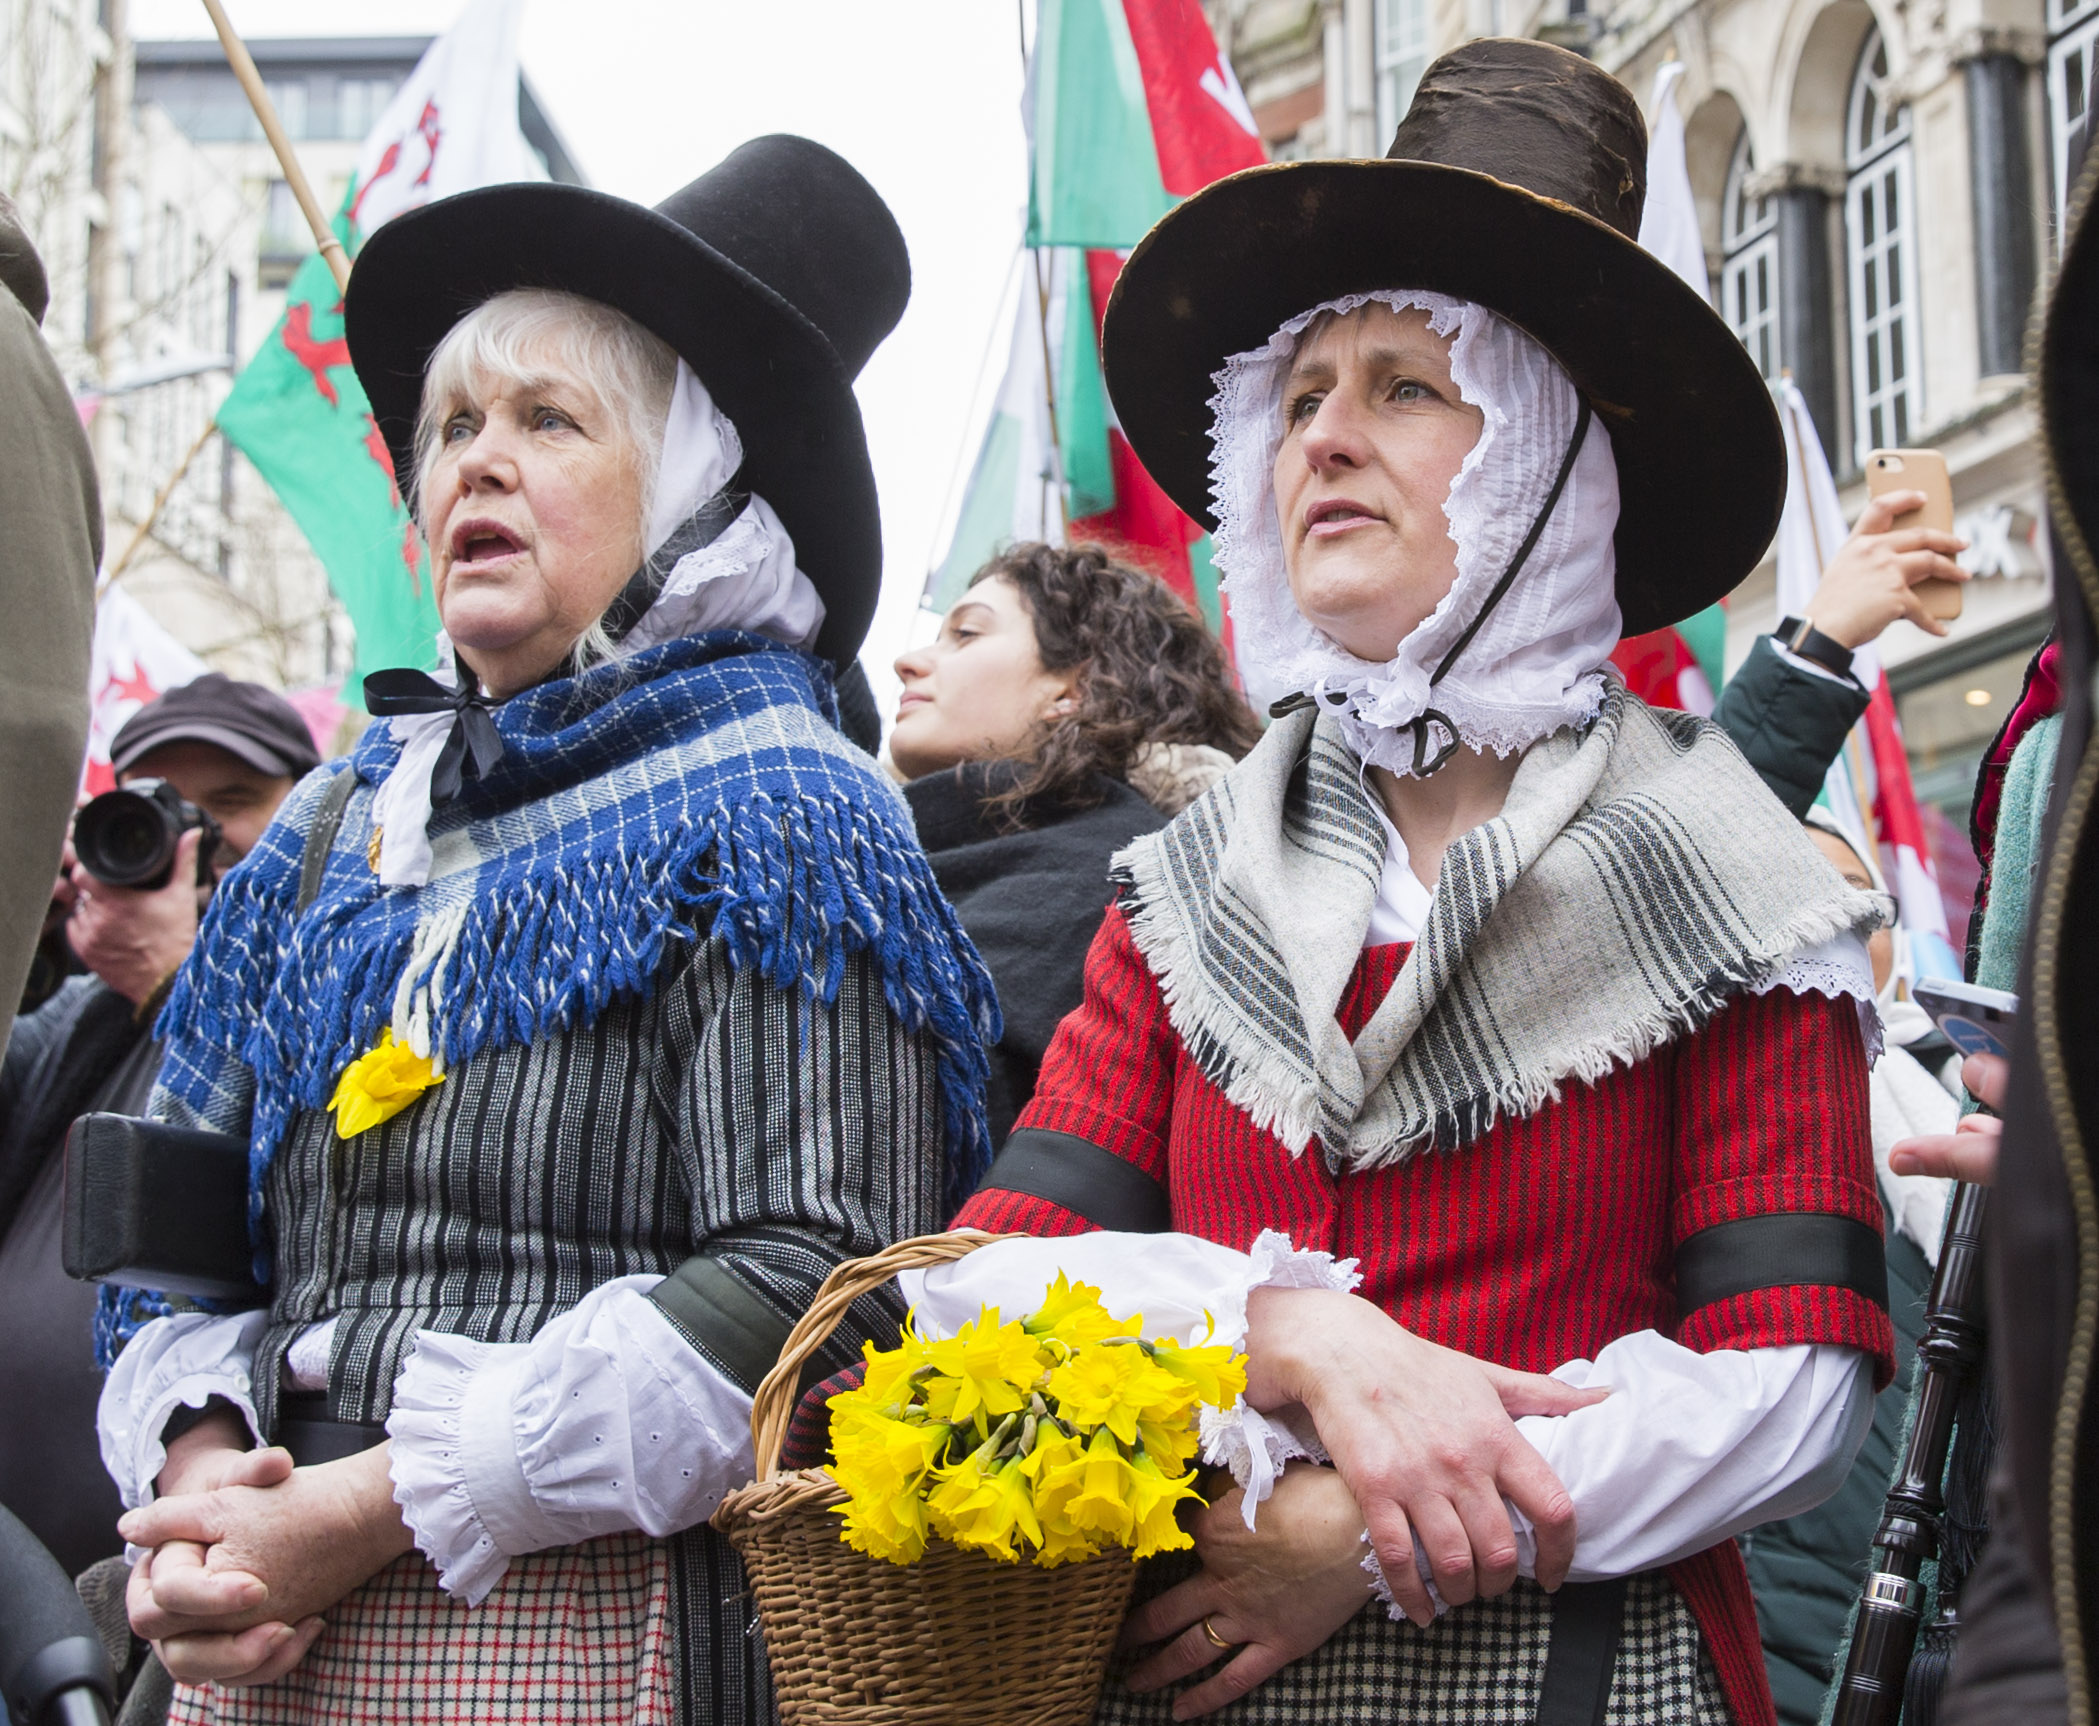 St David's Day Parade In Cardiff